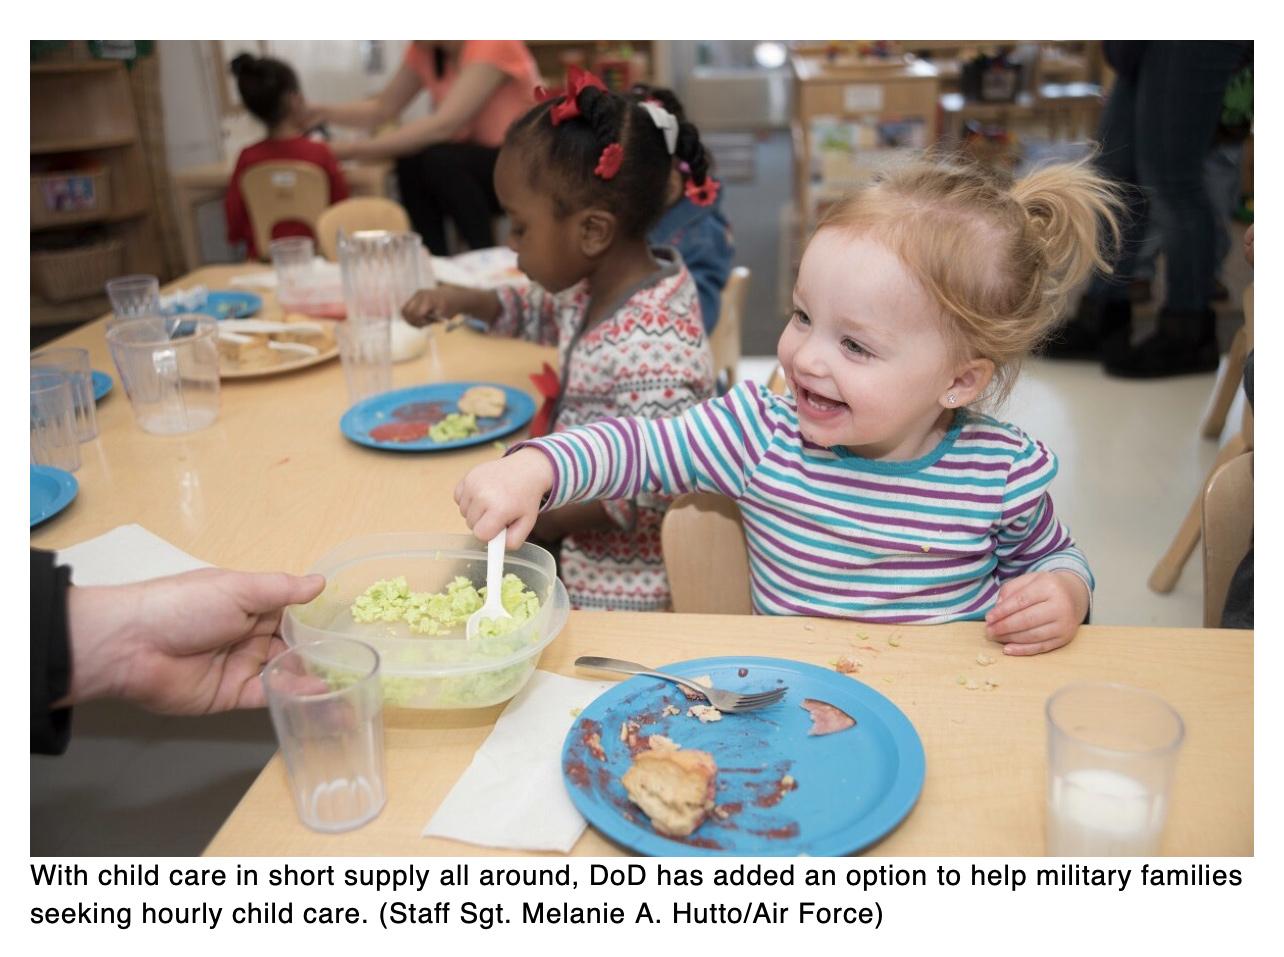  New DoD option helps military parents find hourly child care